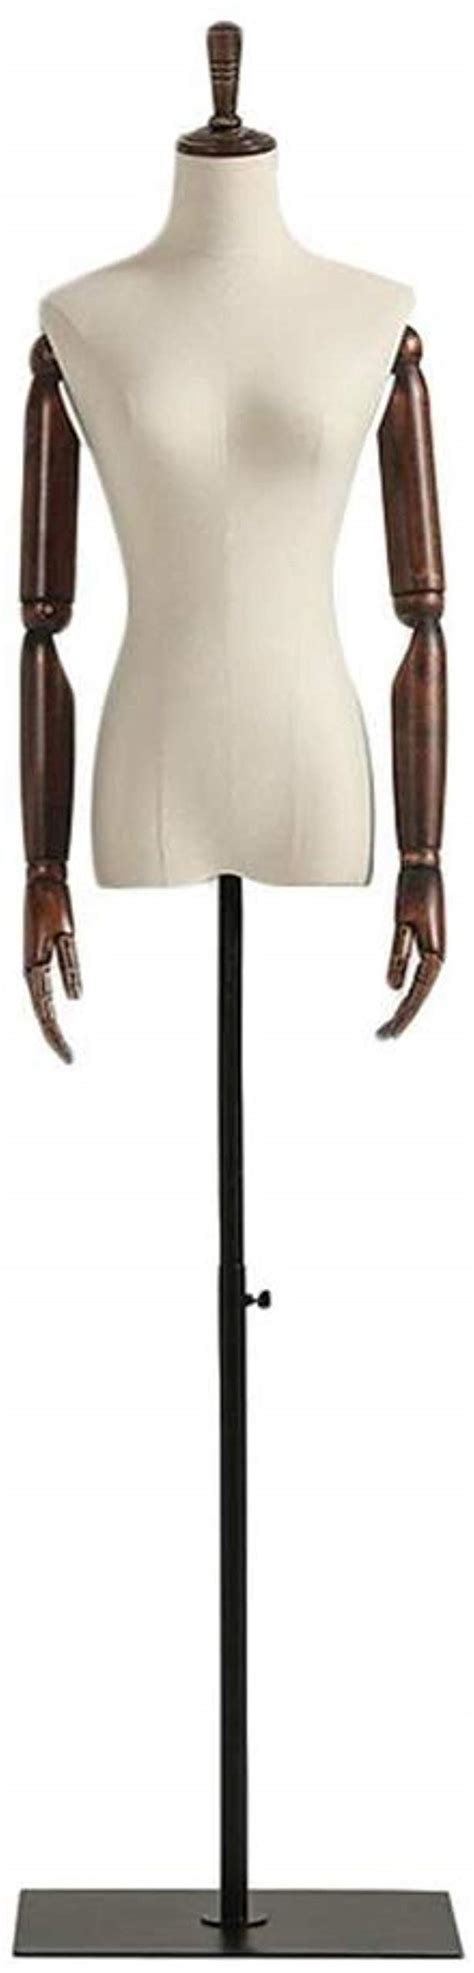 Buy Taisk Professional Tailors Dummy With Arms Mannequin Fashion